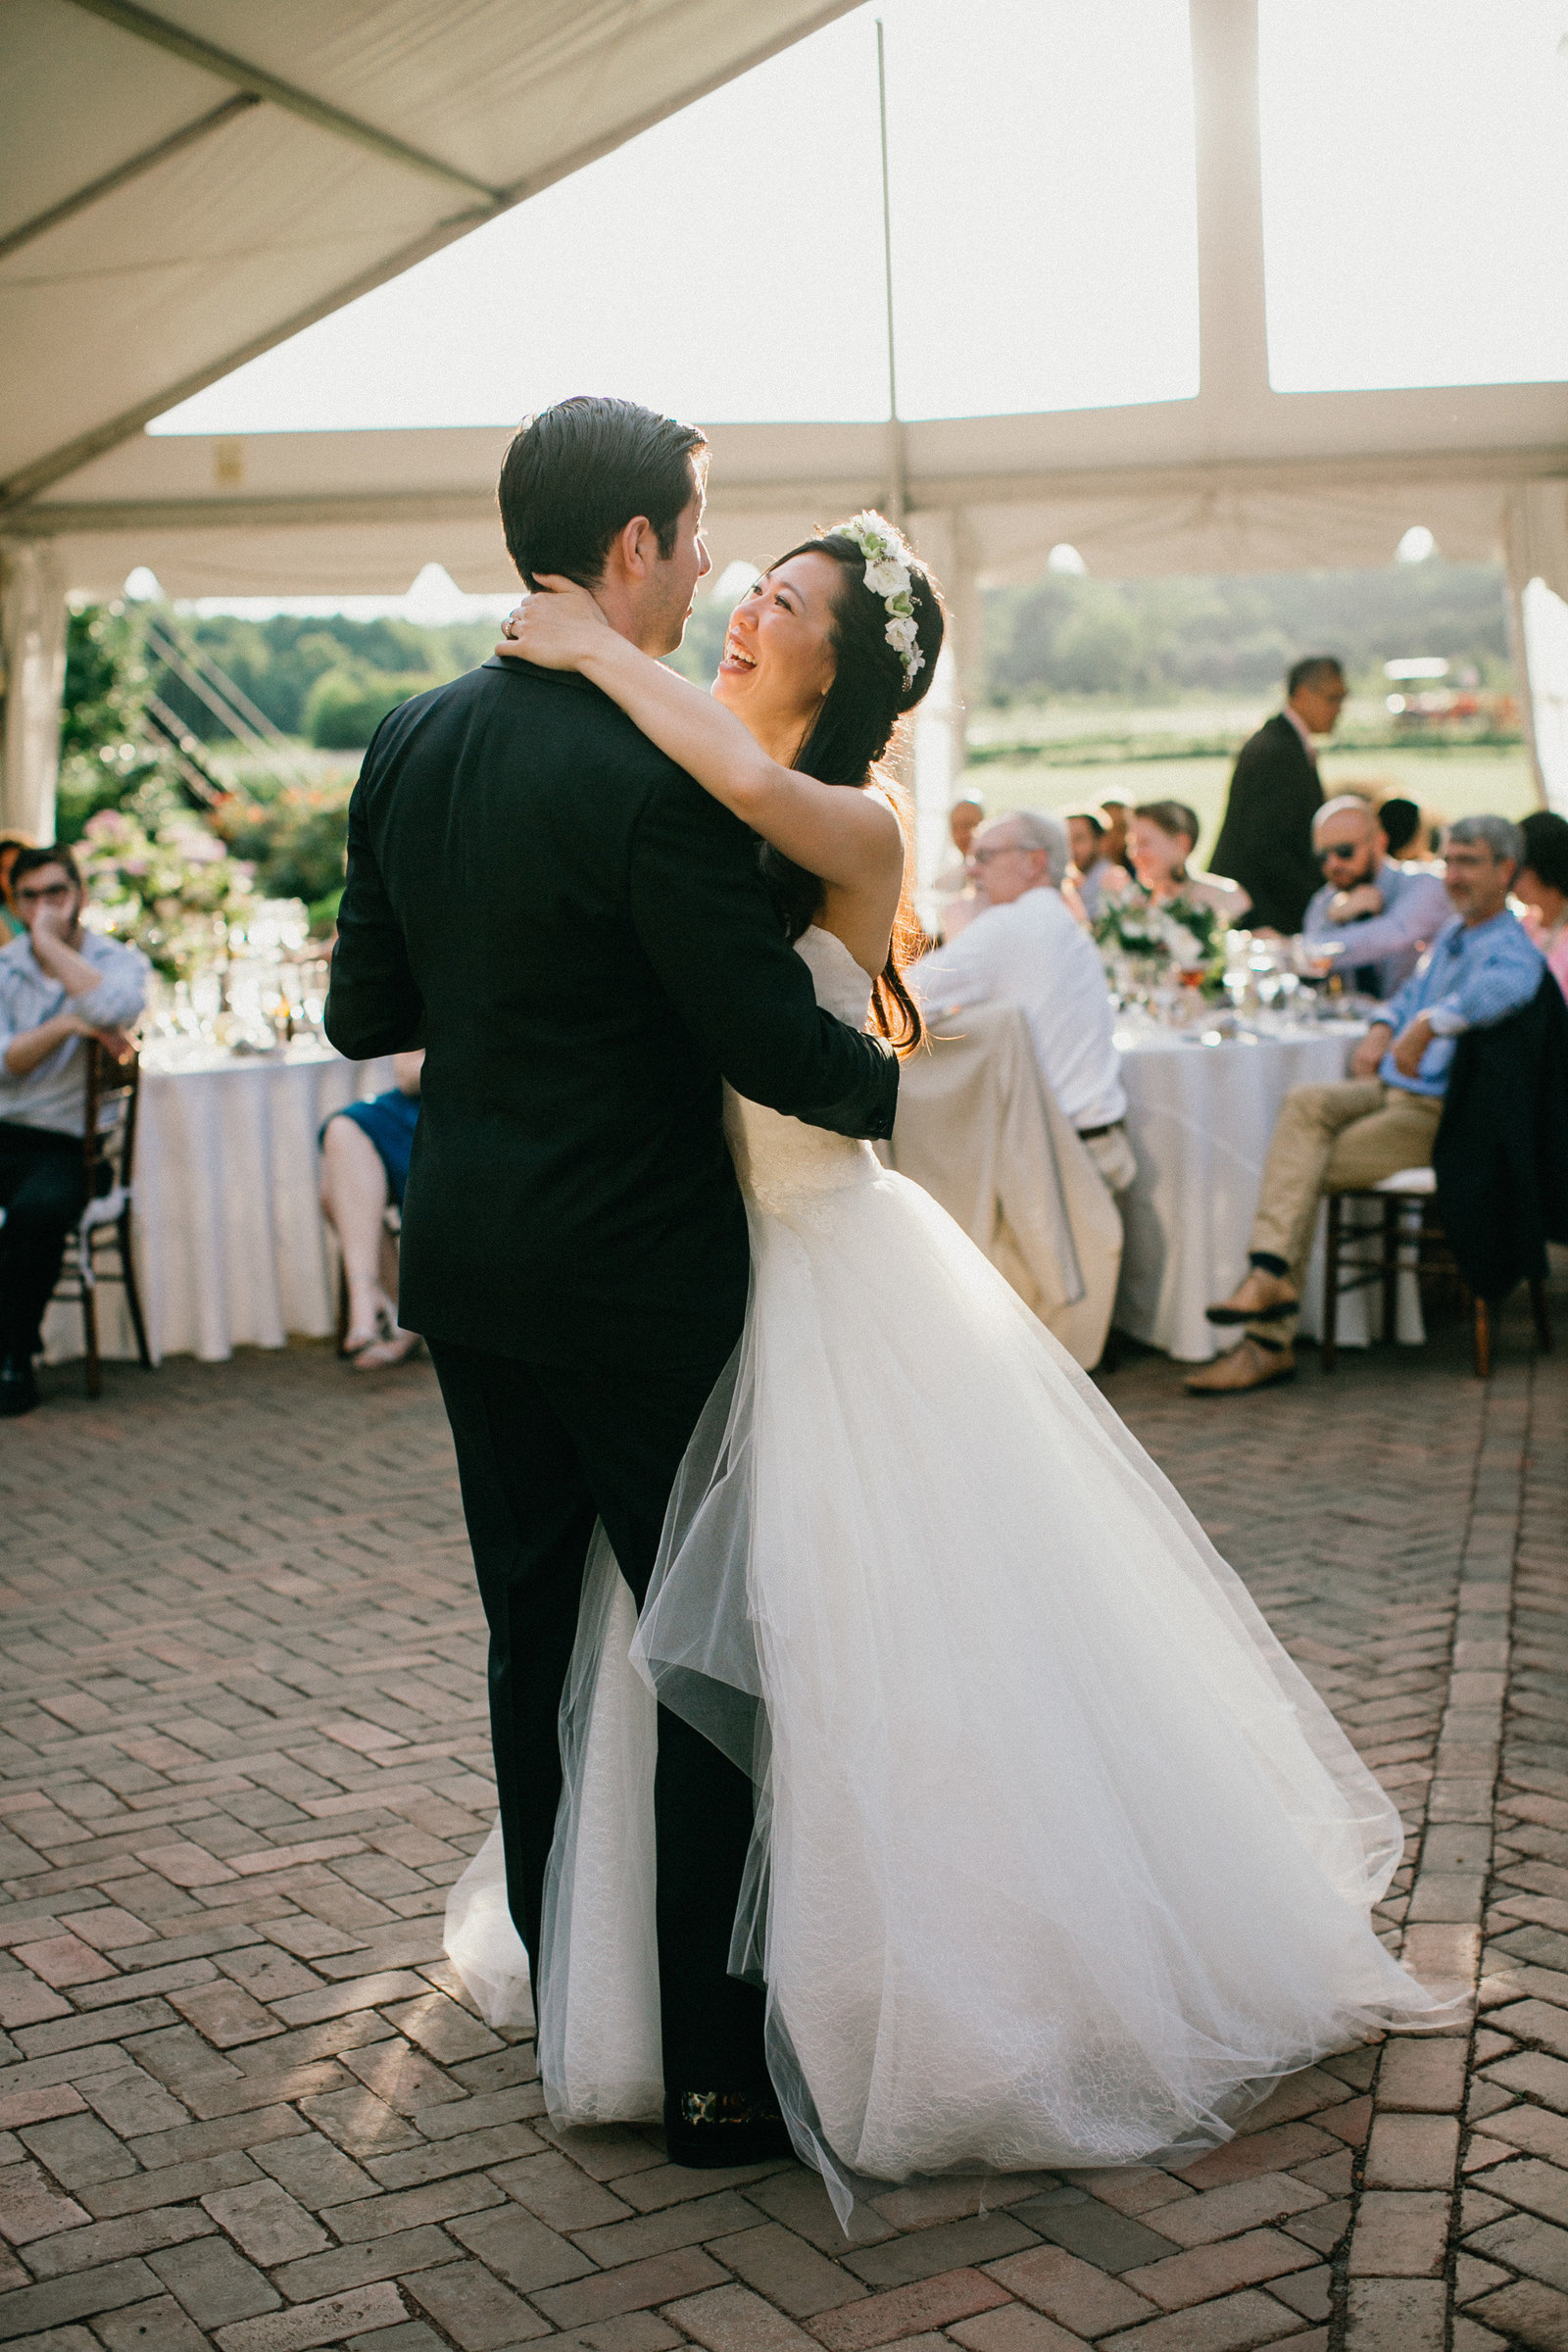 Bride and groom share their first dance together as husband and wife under the large event tent at Fernbrook Farm.